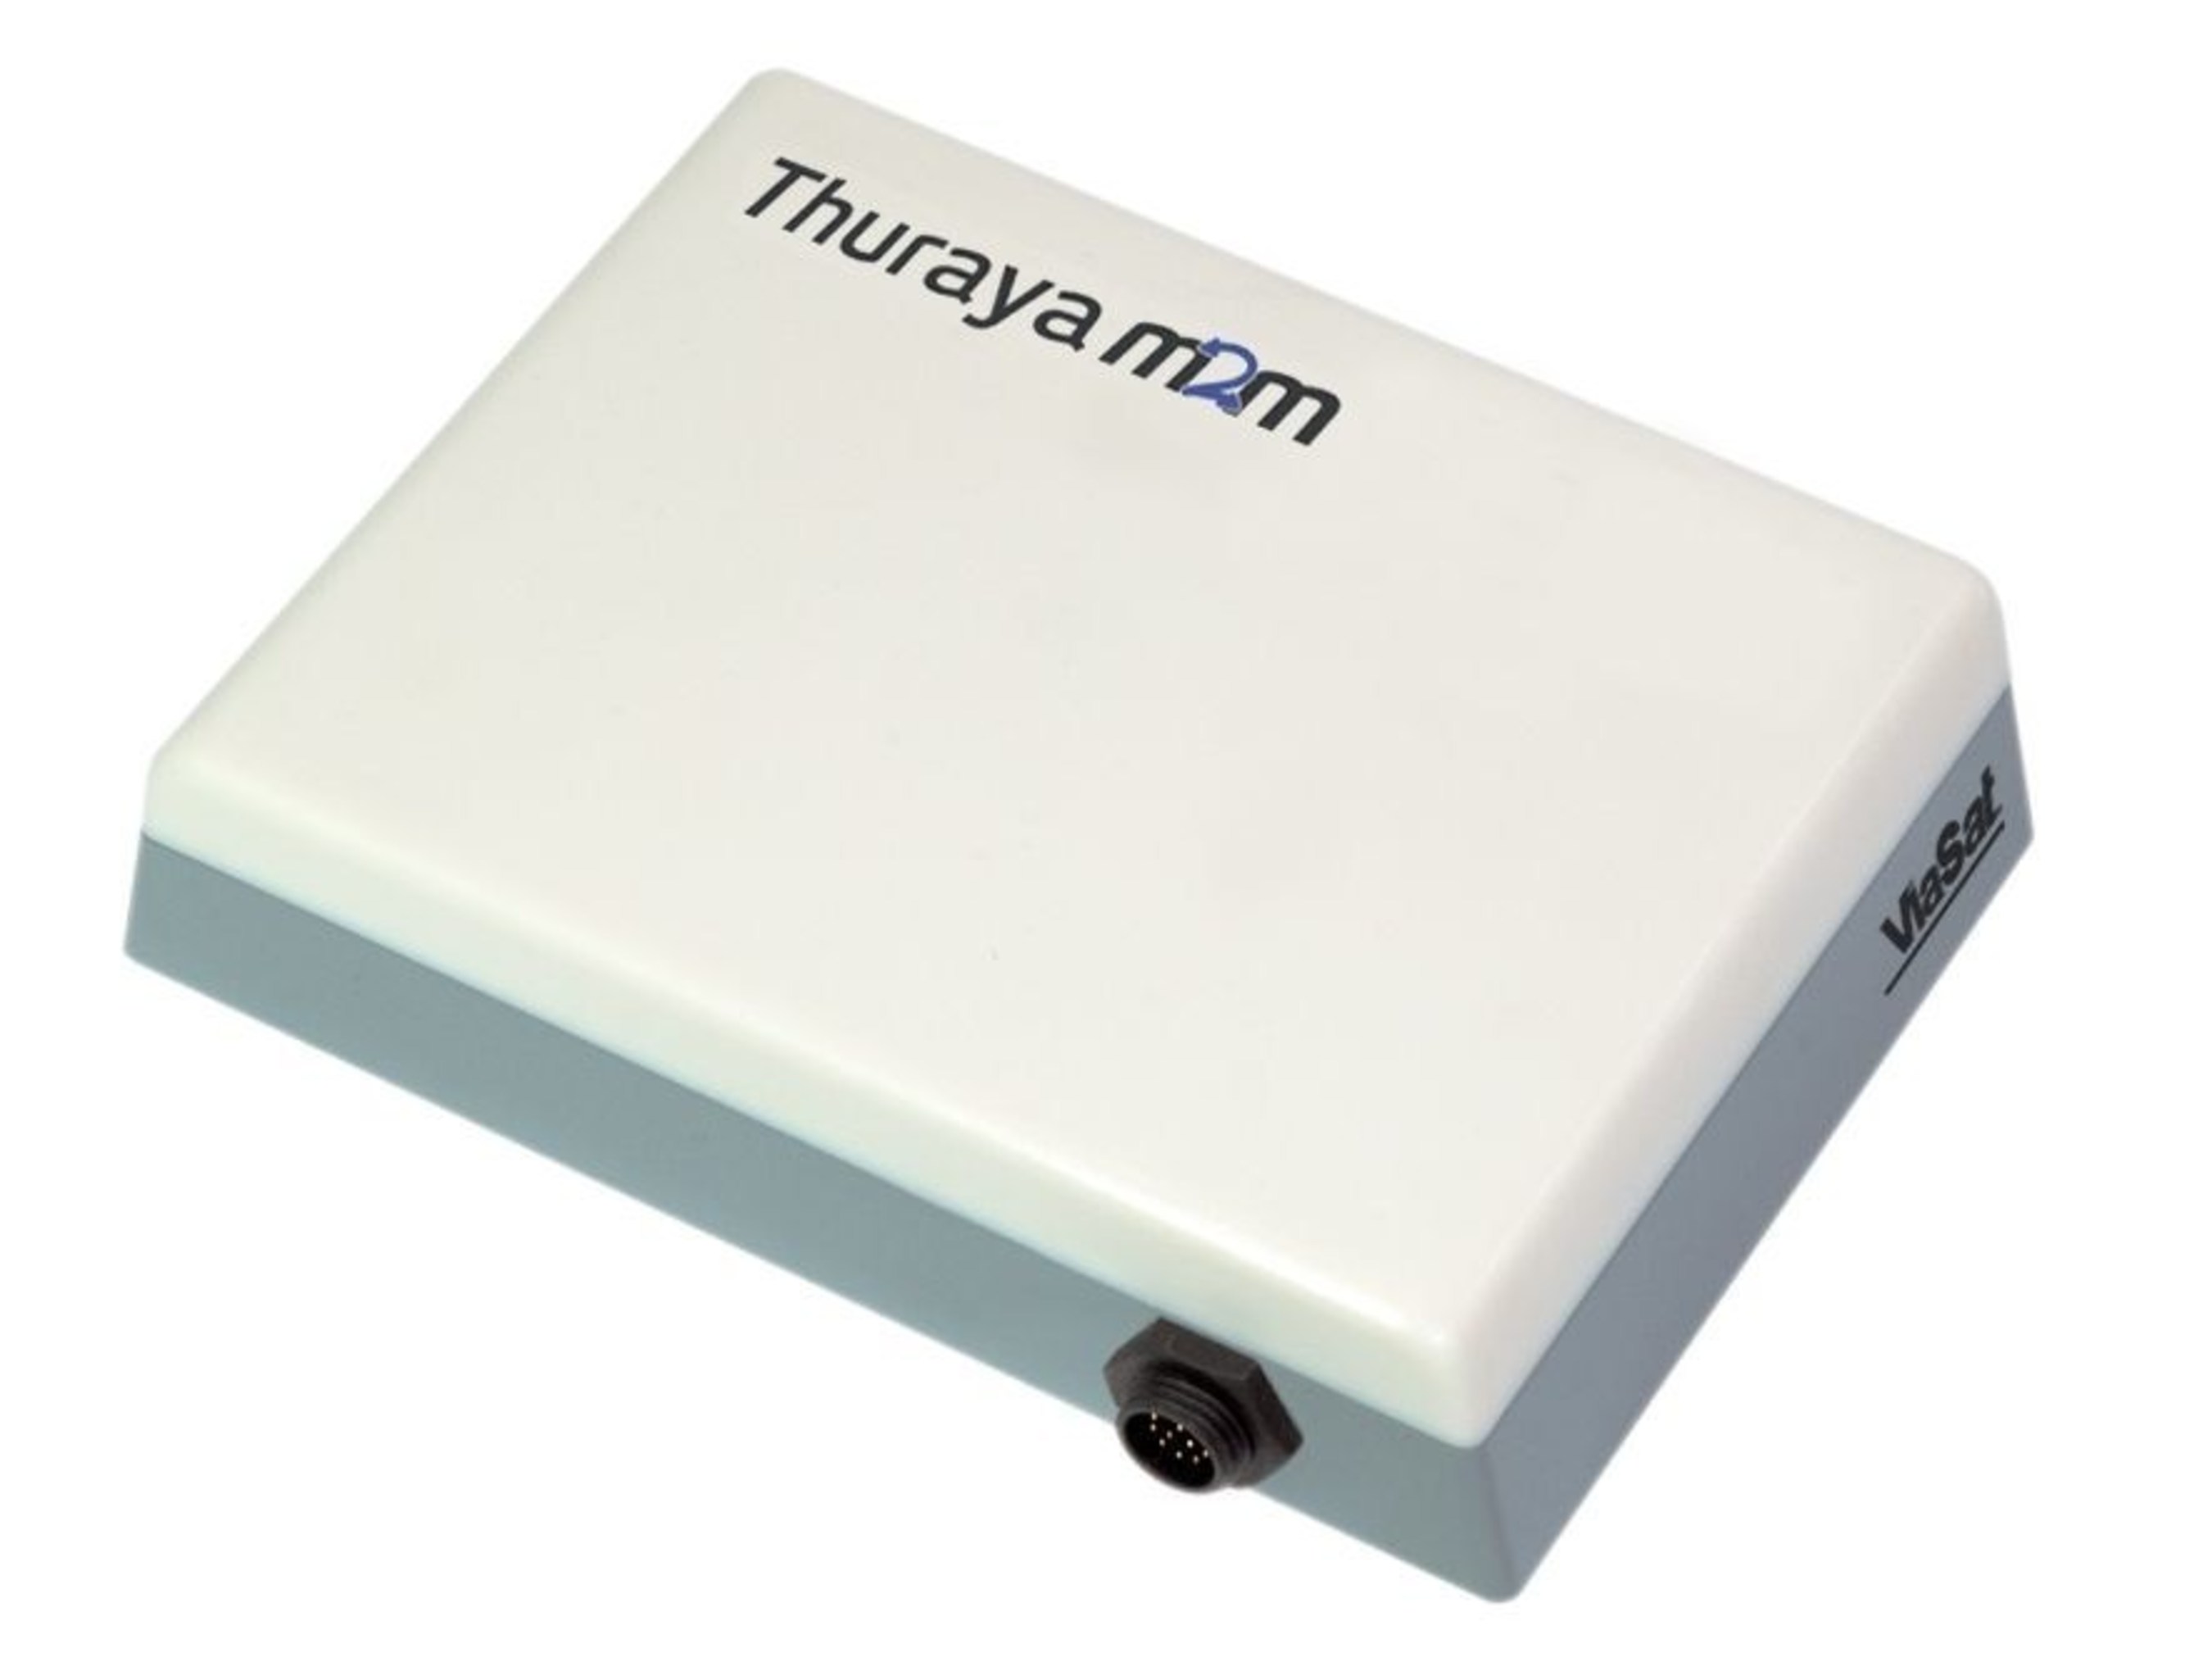 ThurayaFT2225 M2M Terminal - Connecting people, assets and businesses, the new ThurayaFT2225 is a rugged M2M terminal built to withstand harsh weather conditions in remote unmanned areas. With Ethernet and Wi-Fi interface options, integration into new M2M applications is simple and time efficient. (PRNewsFoto/Thuraya Satellite) (PRNewsFoto/Thuraya Satellite)